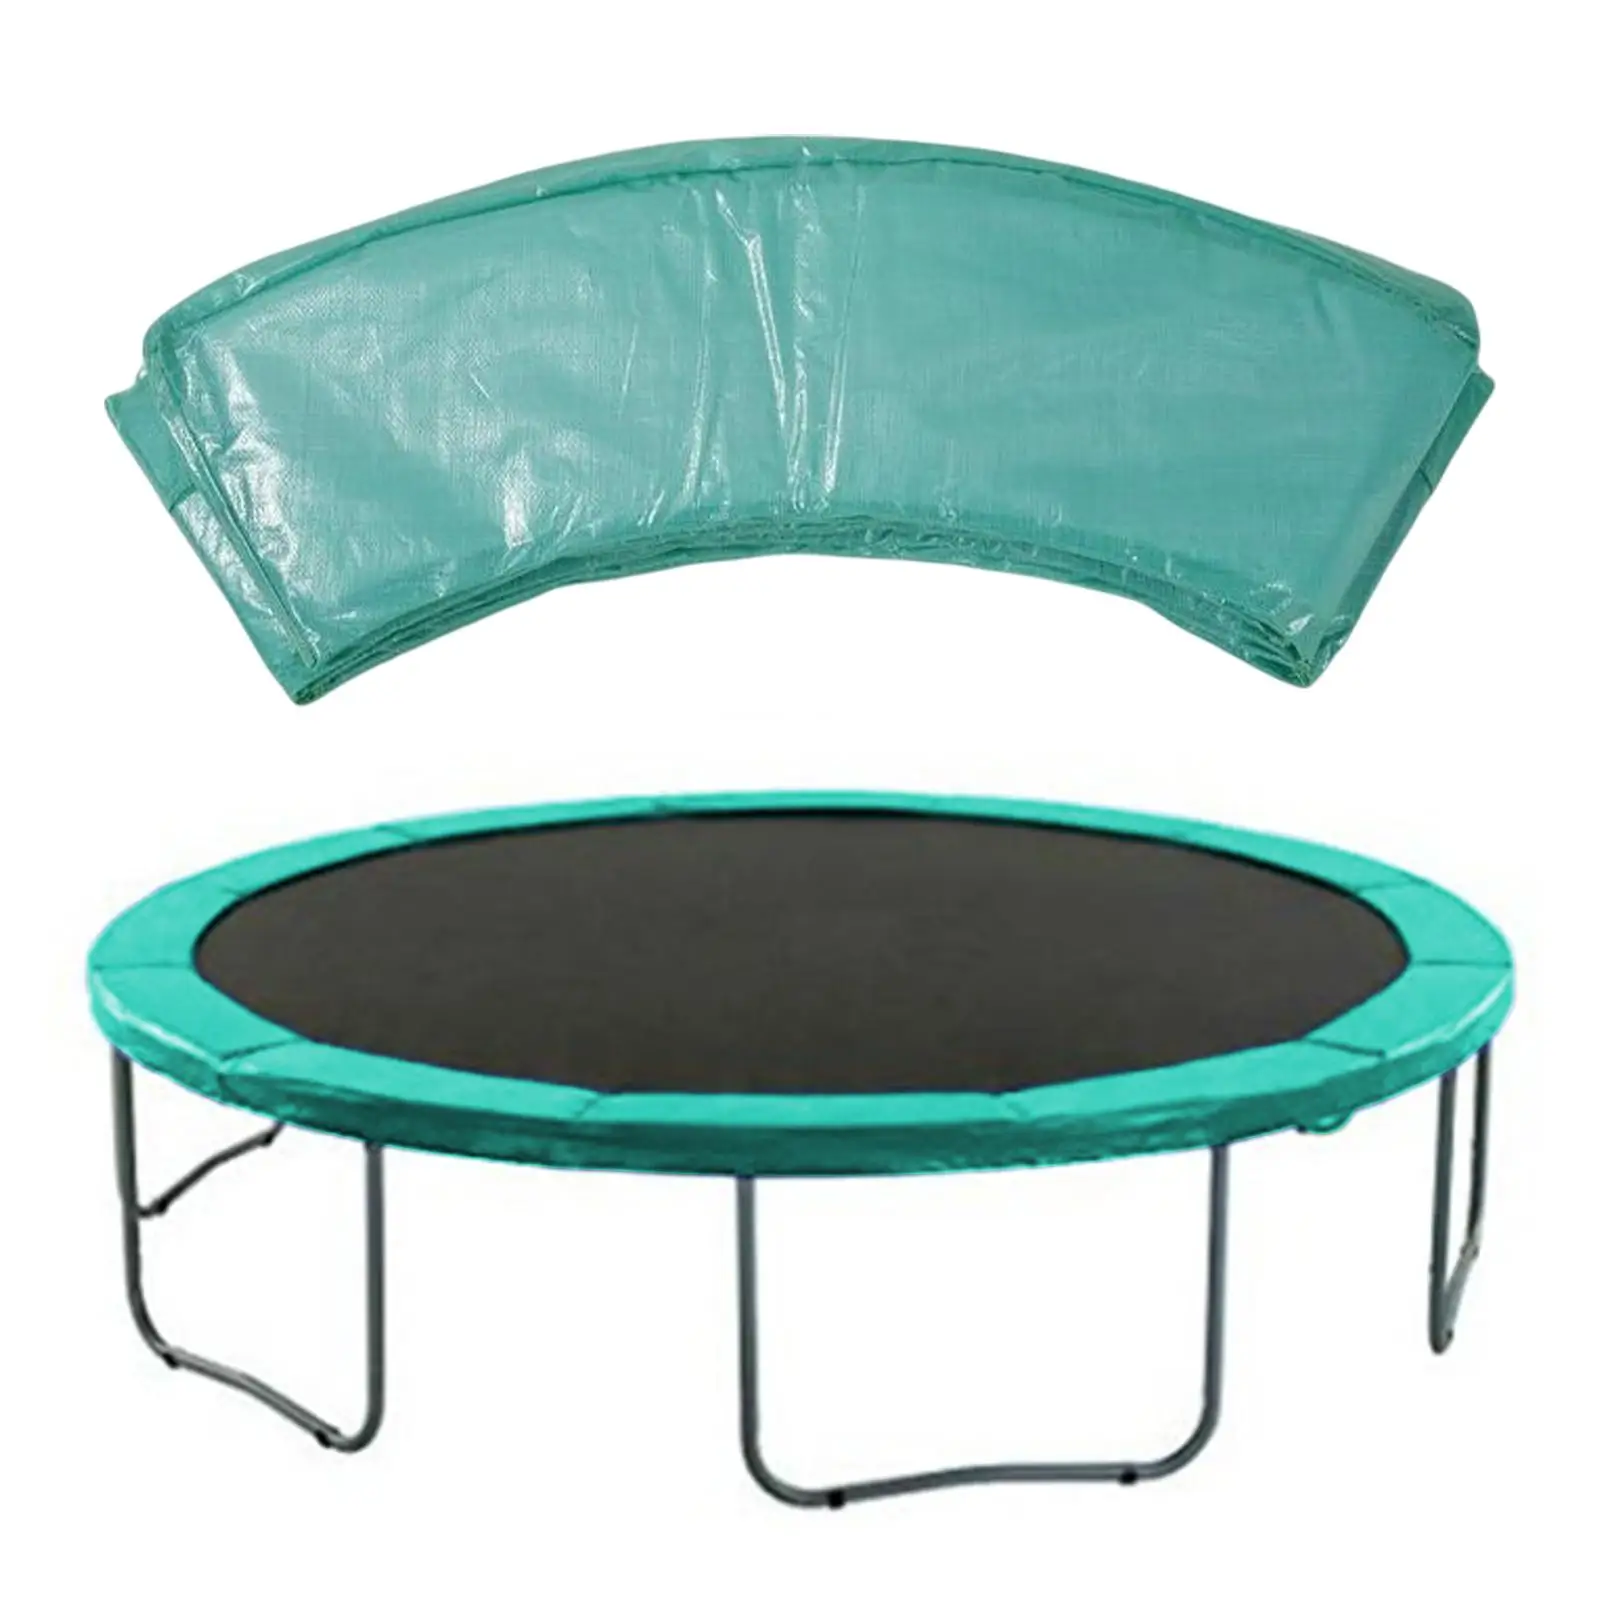 Trampoline Safety Mats Water Resistant Spring Protection Cover for Trampoline